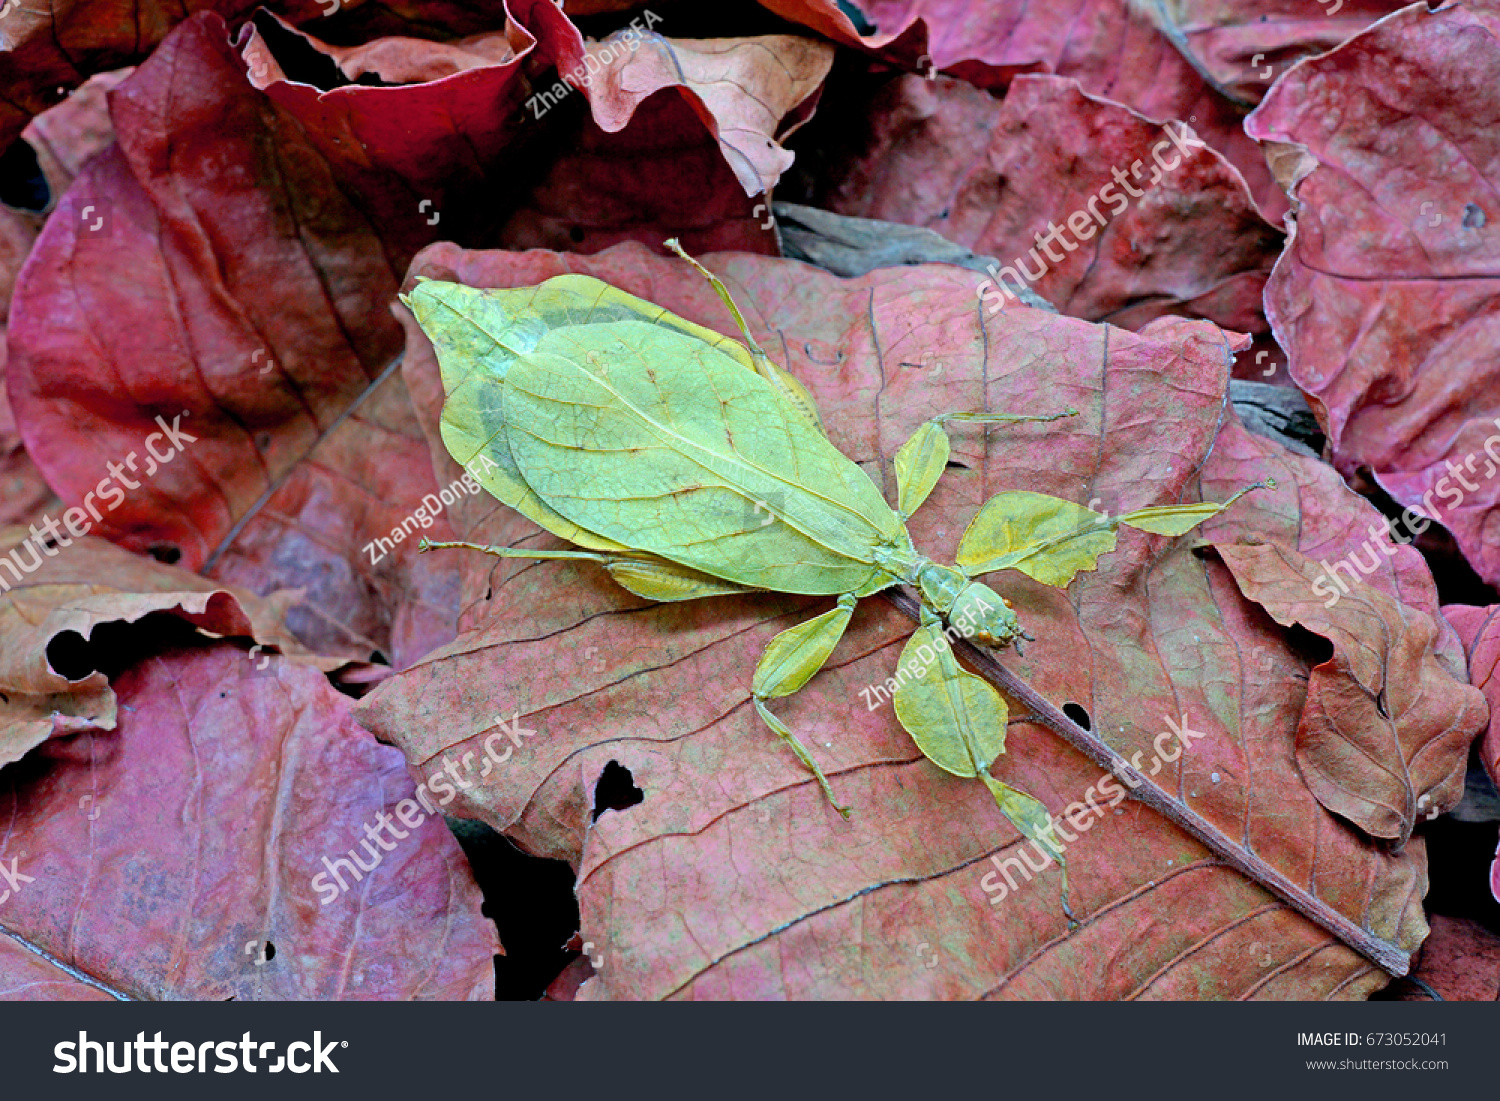 Leaf insect : Phyllium bioculatum , green leaf insect on red autumn leaves , excotic , rare and protected #673052041